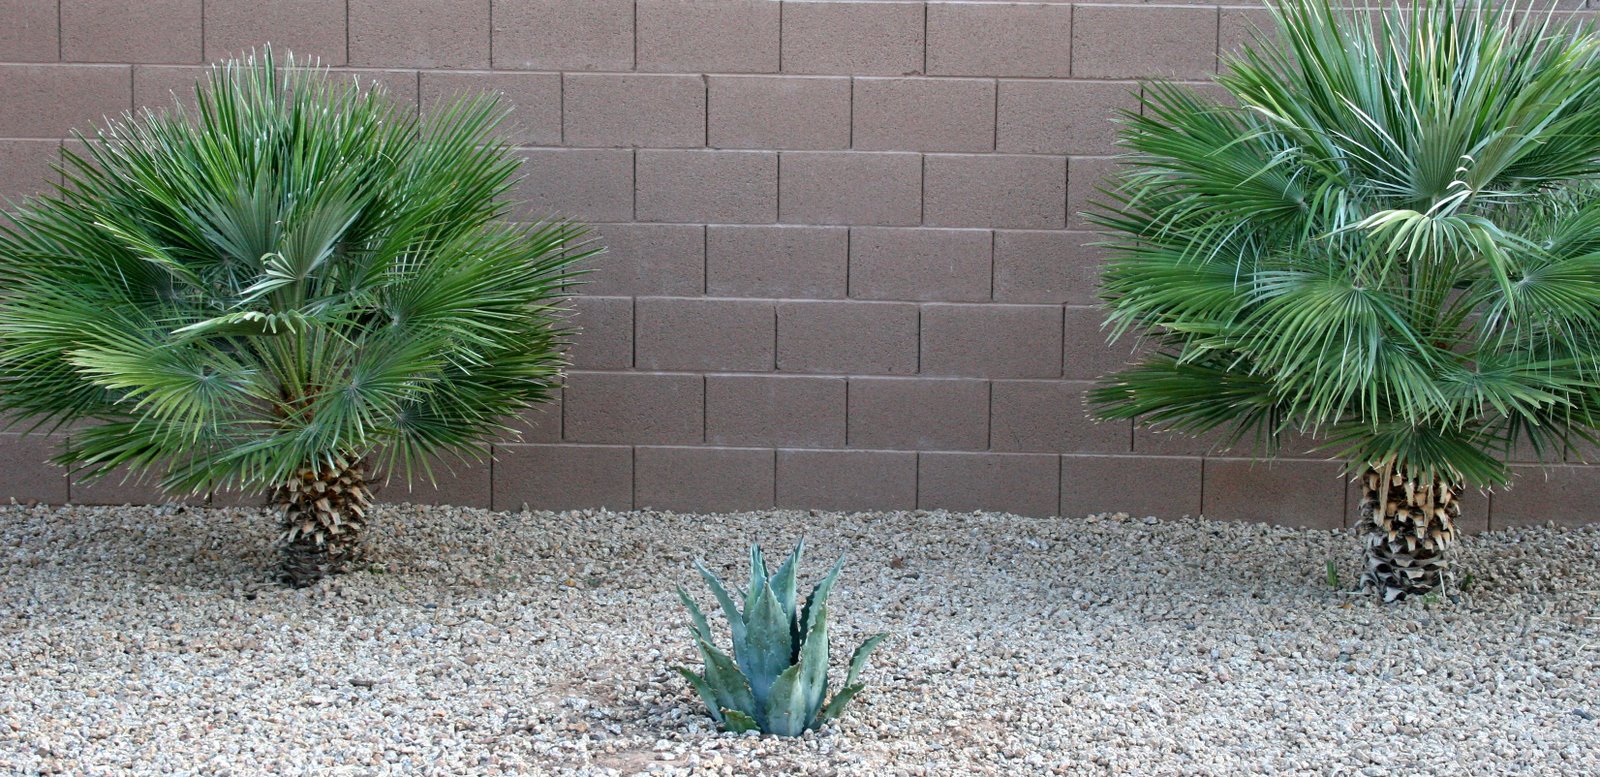 [landscaping,+blue+agave+with+dwarf+palms.jpg]